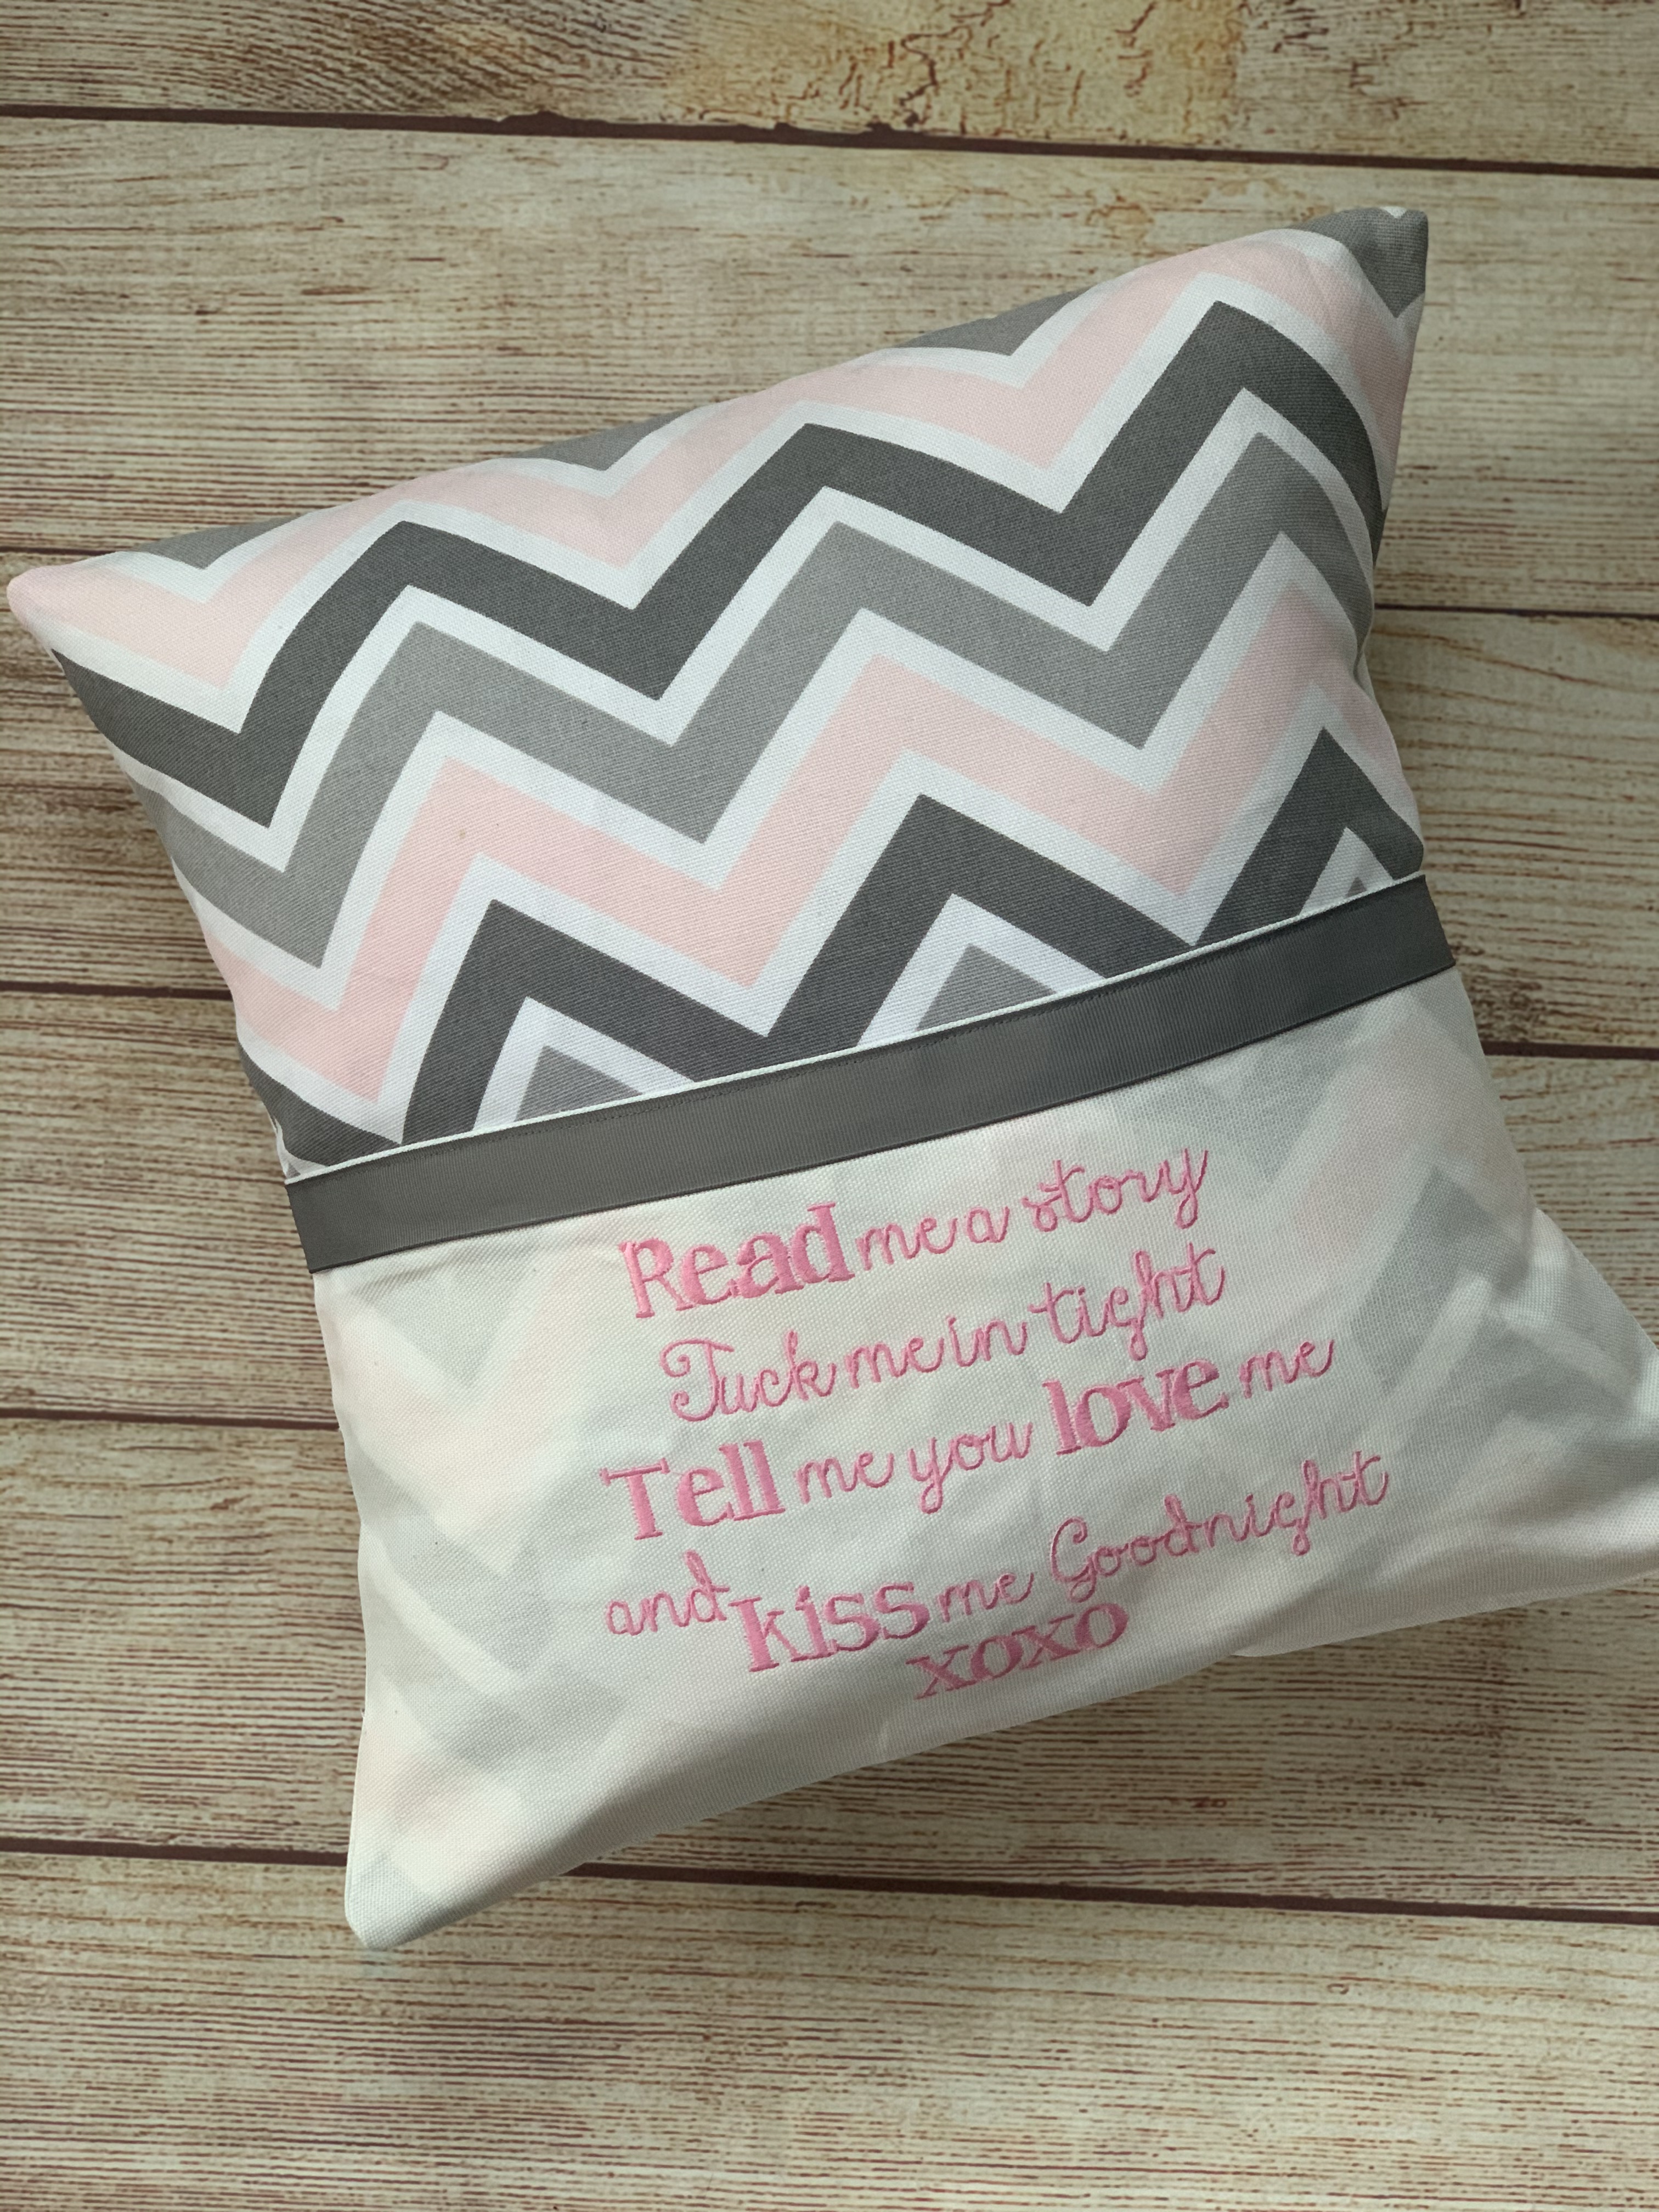 Read This Before You Buy Another Throw Pillow!